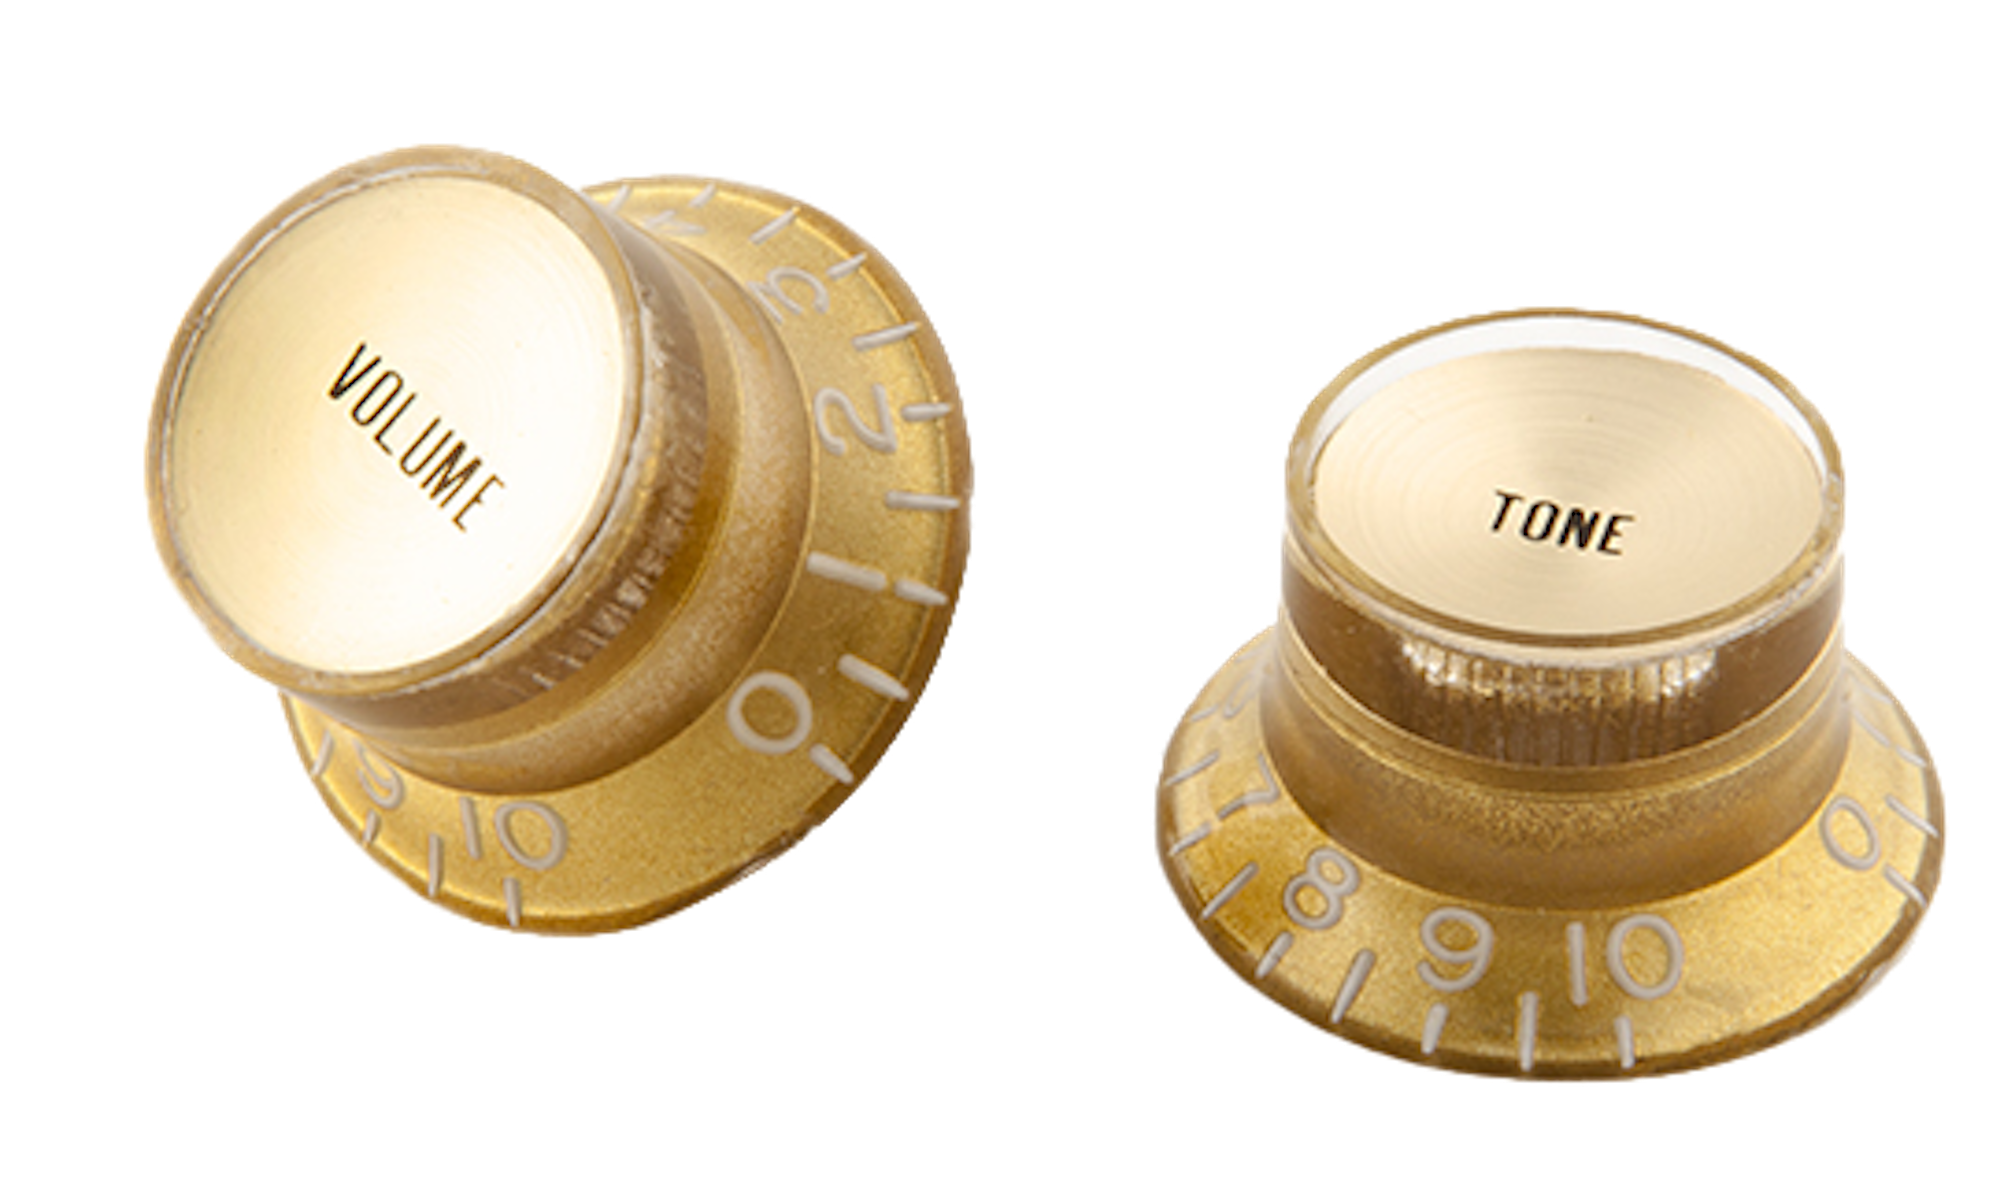 Top Hat Knobs w/ Gold Metal Insert (Aged Gold)(4 pcs.)